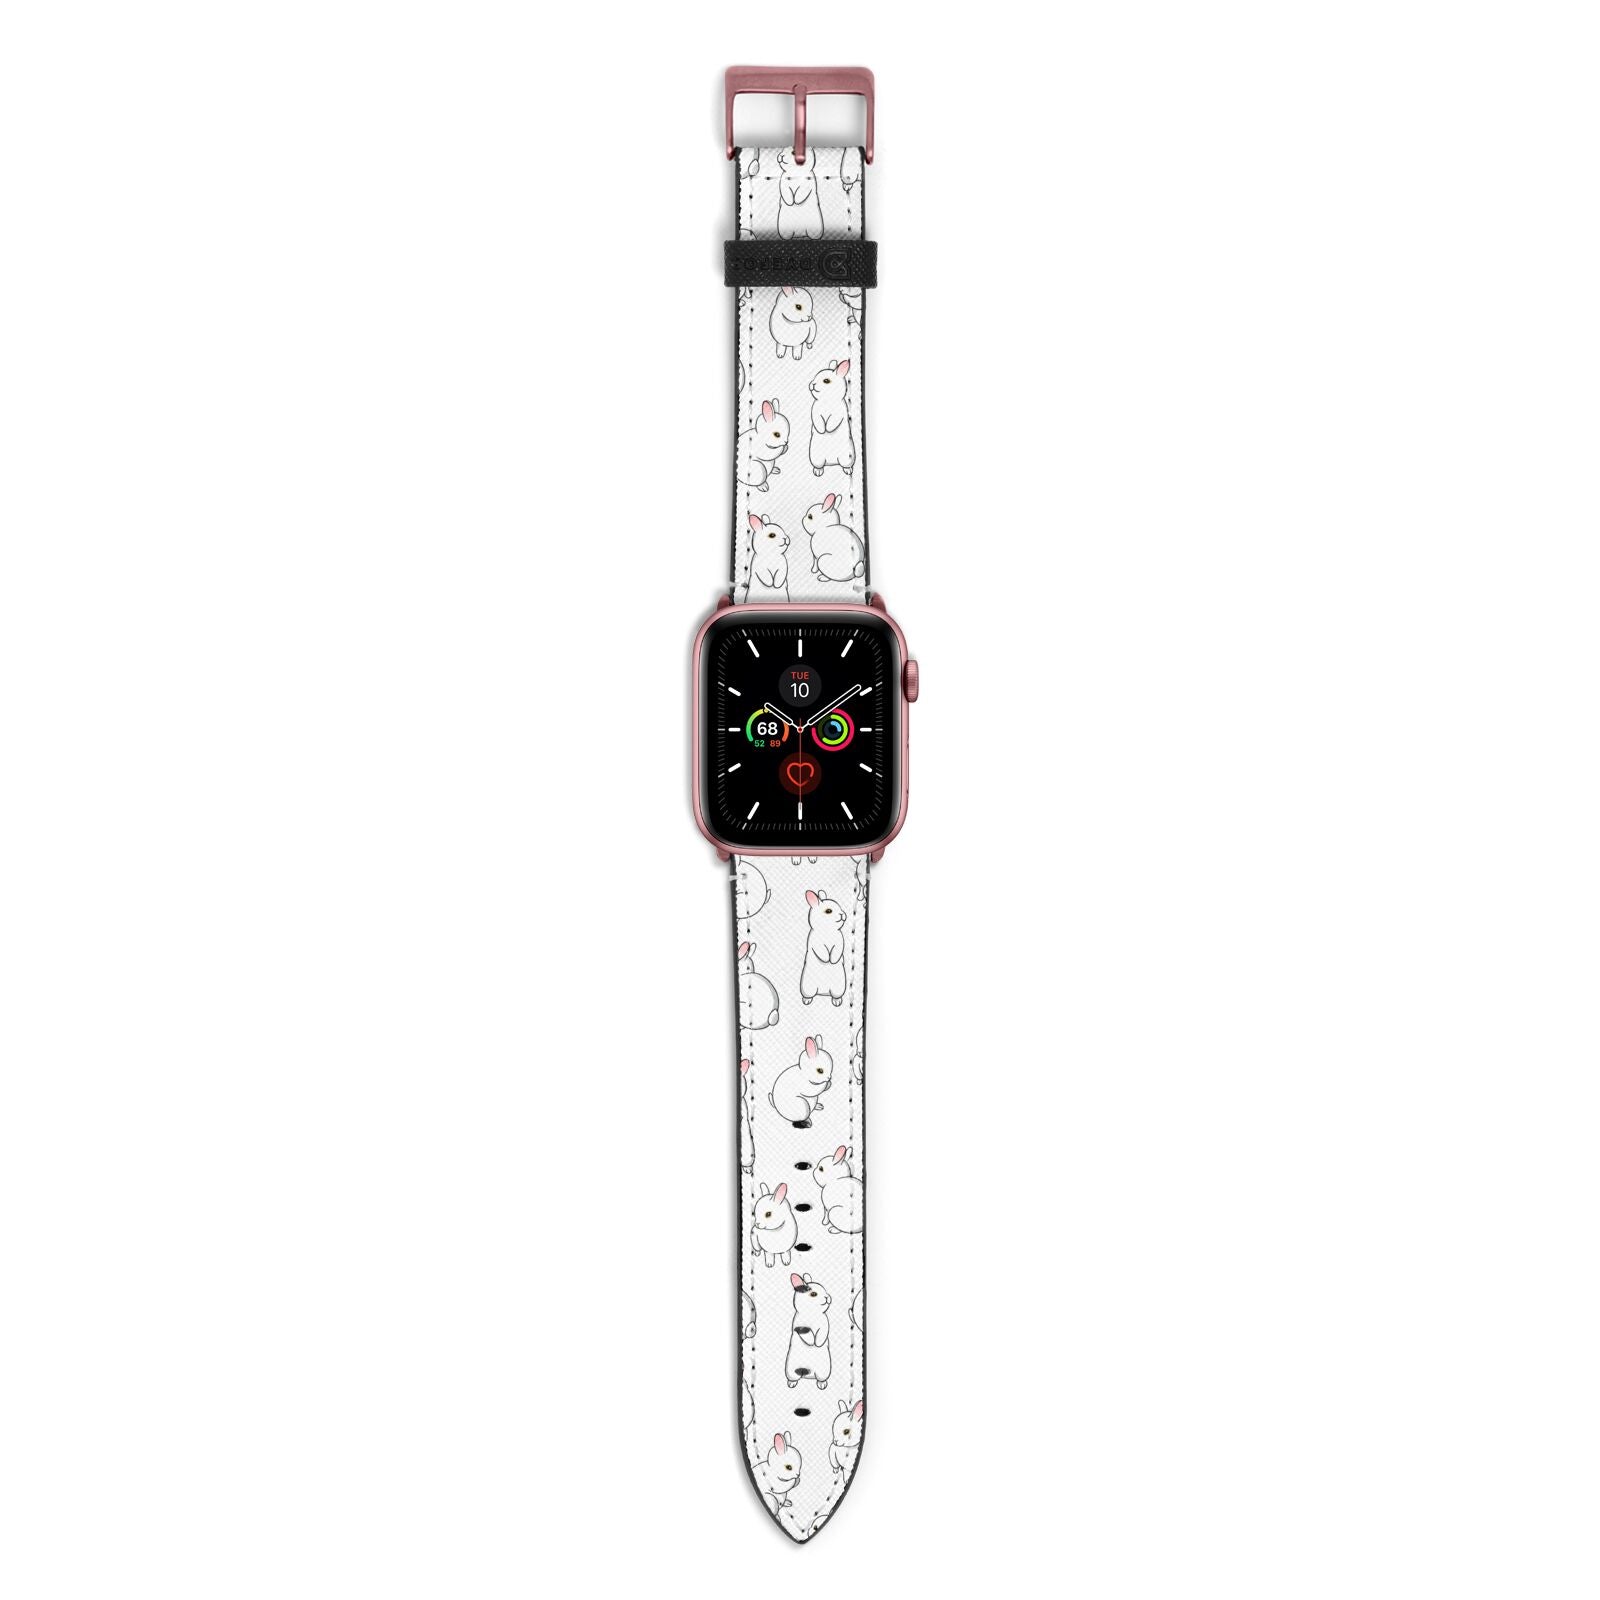 Bunny Rabbit Apple Watch Strap with Rose Gold Hardware